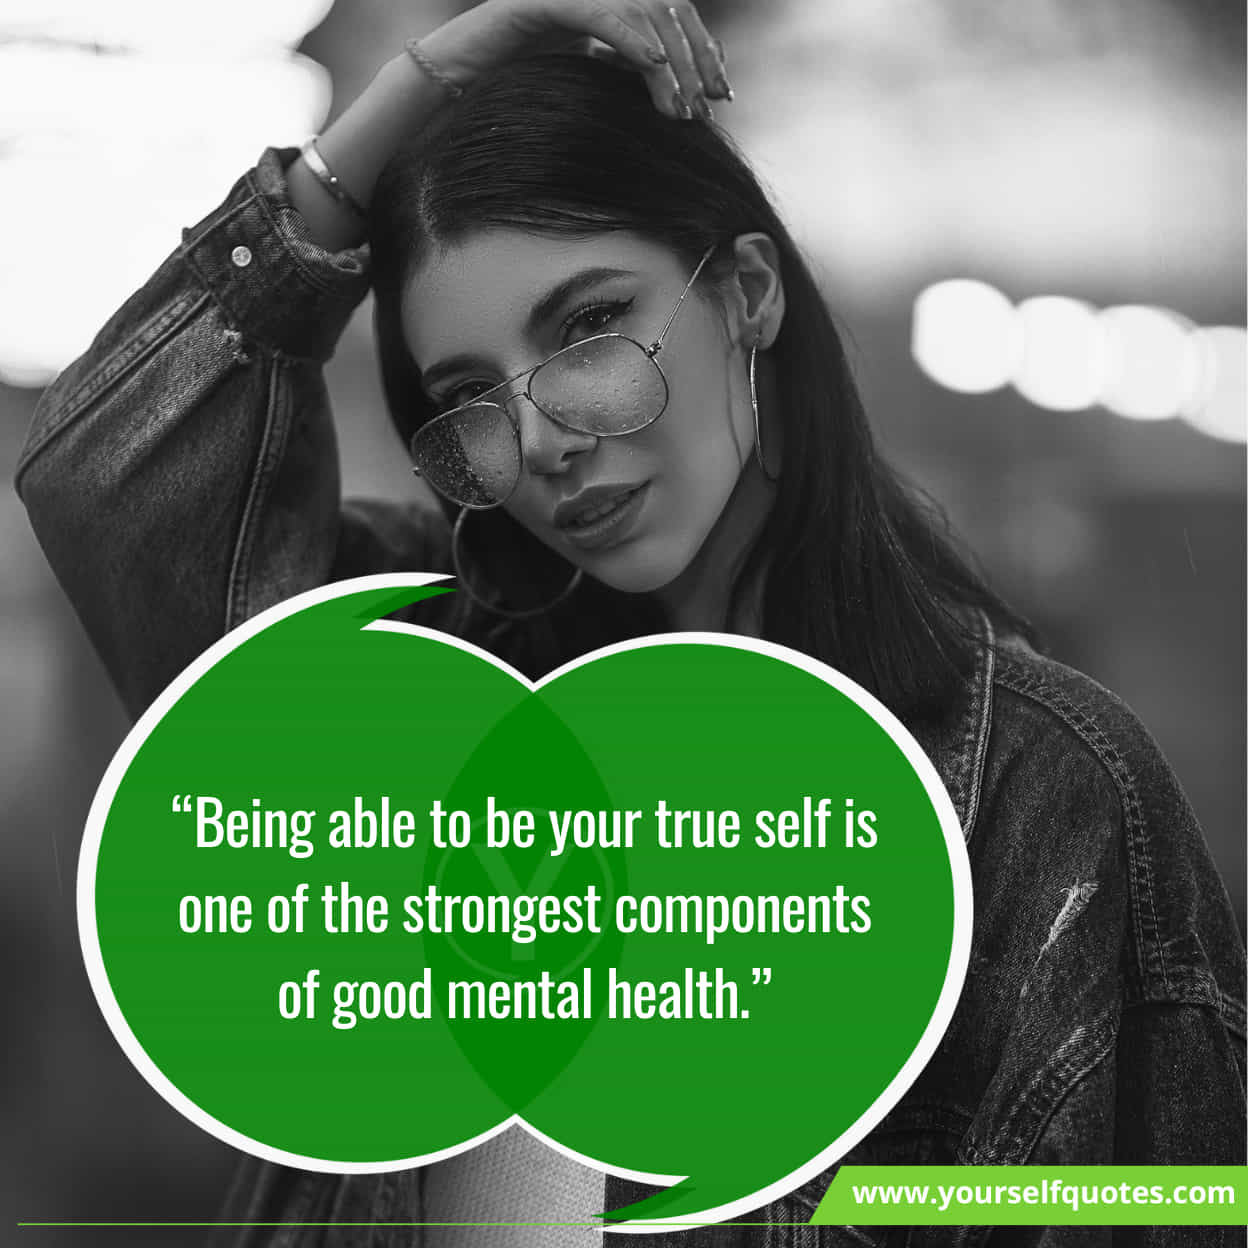 Best Quotes For Prepare Mental Health